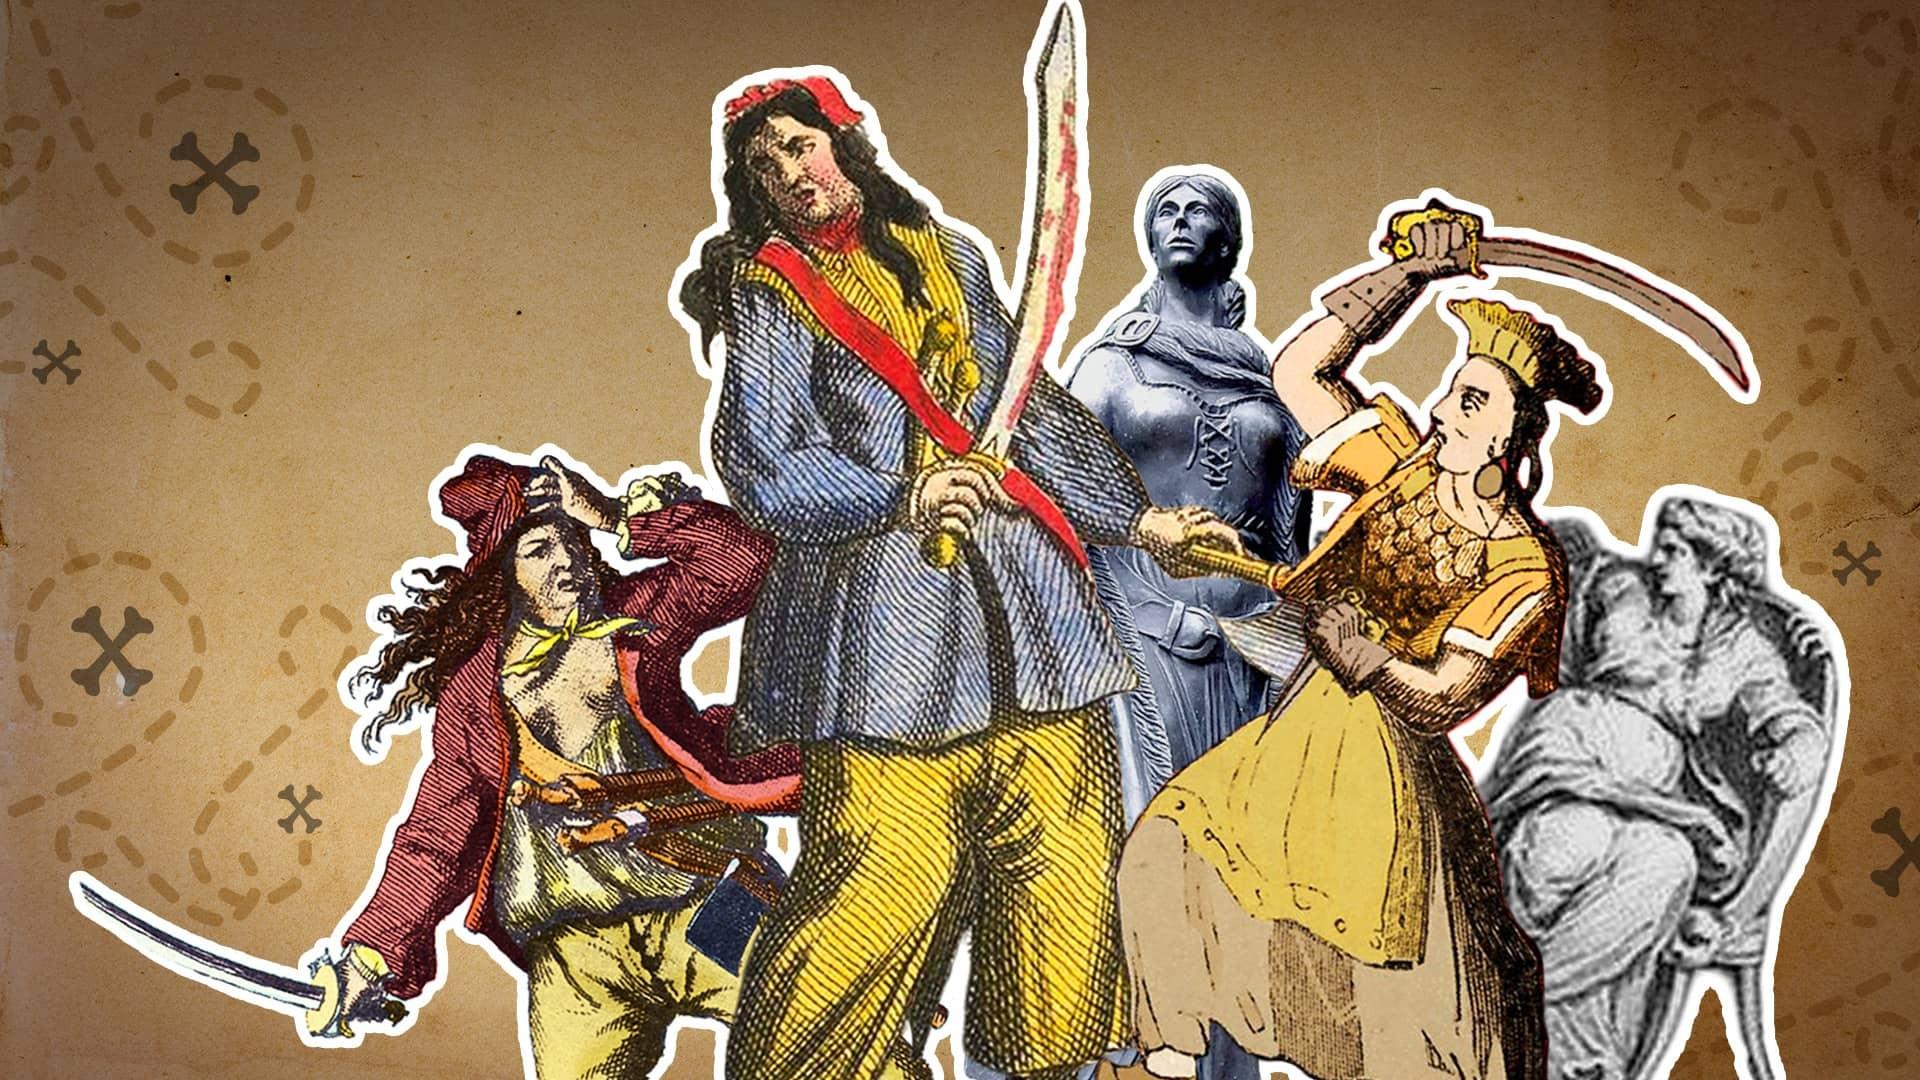 Cut-out images of different pirate figures in various poses.